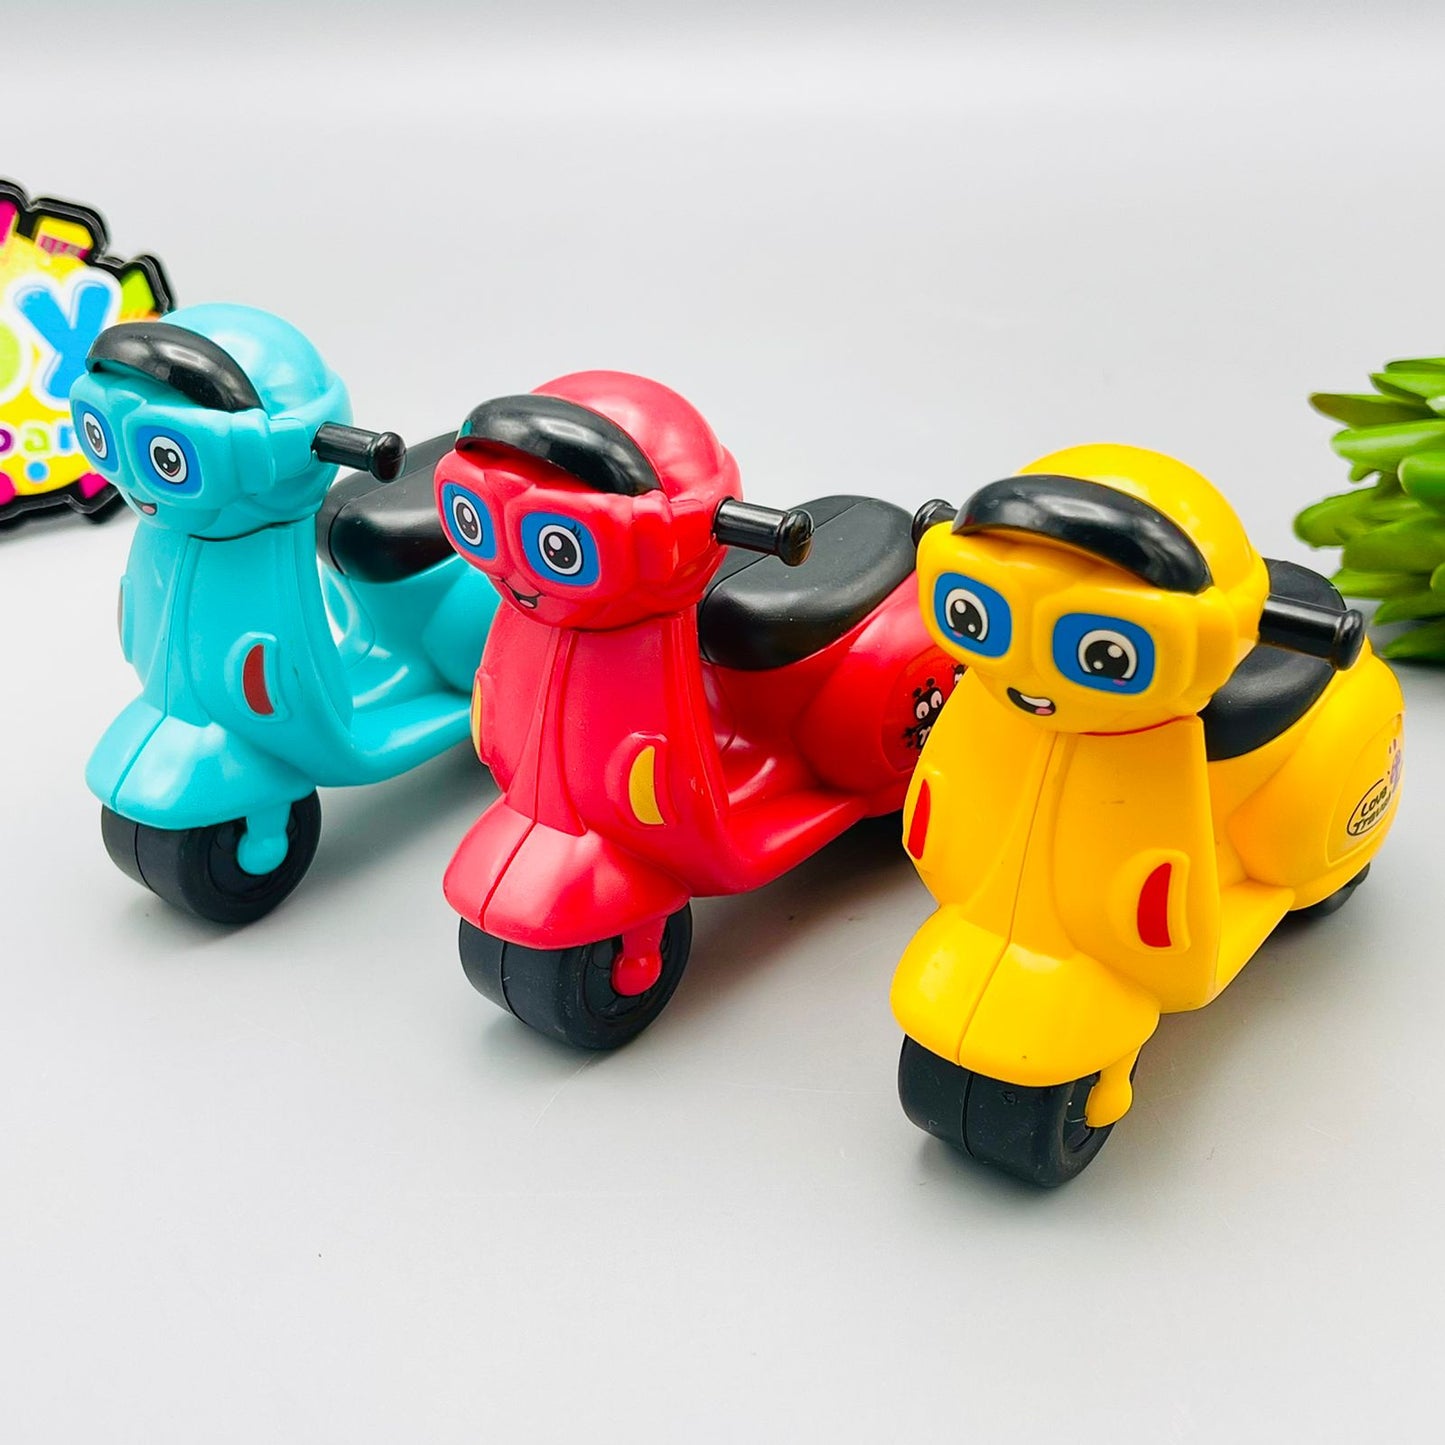 Cute Friction Mini Scooter Toy for Kids. | Push and GO Toy Scooter and Bright Multicolor